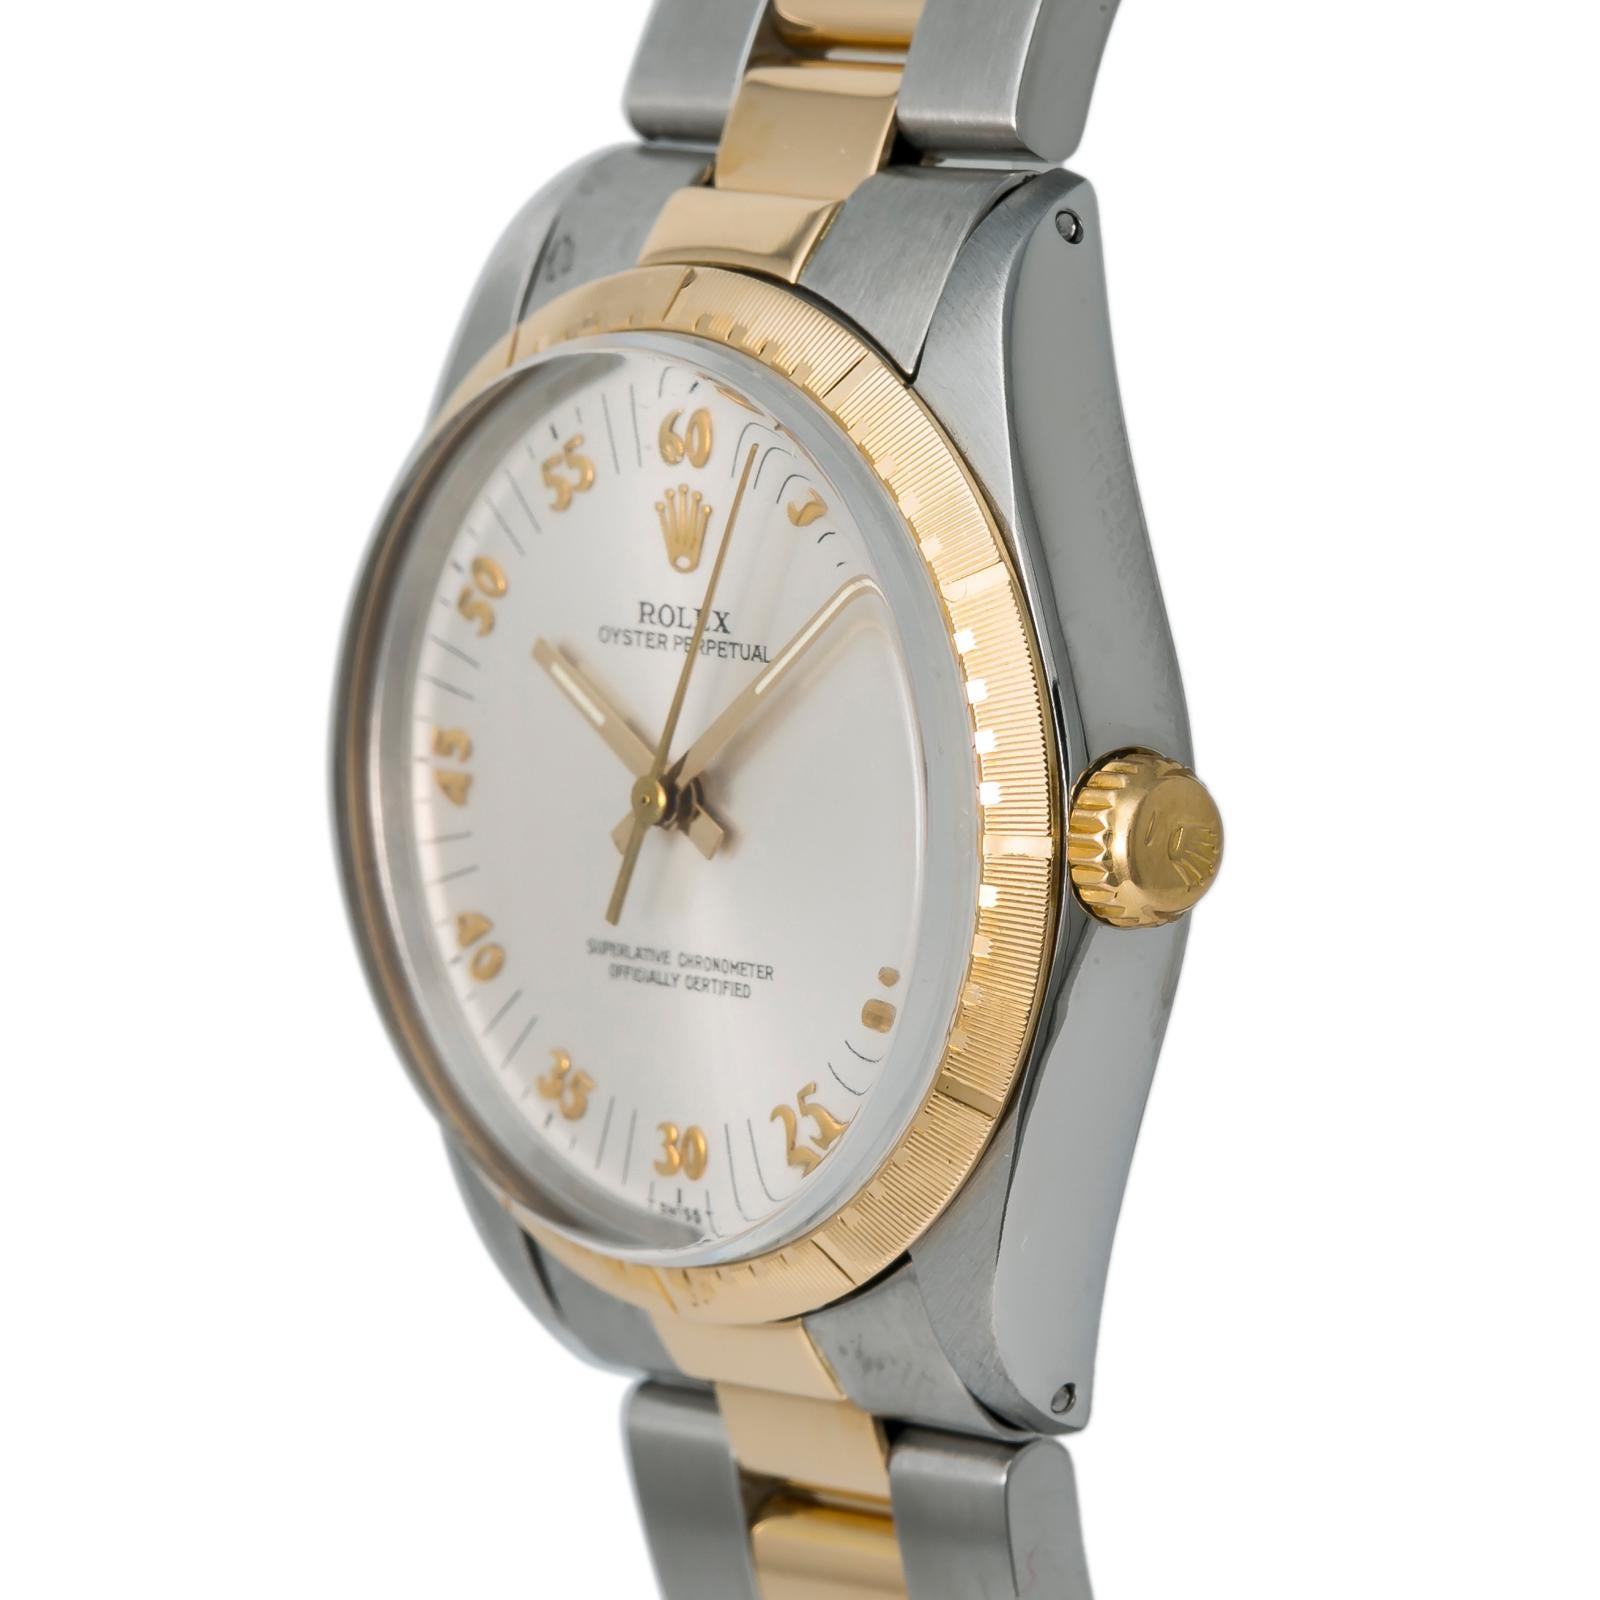 Contemporary Rolex Oyster Perpetual 1038 Automatic Unisex Watch Two-Tone 18k YG